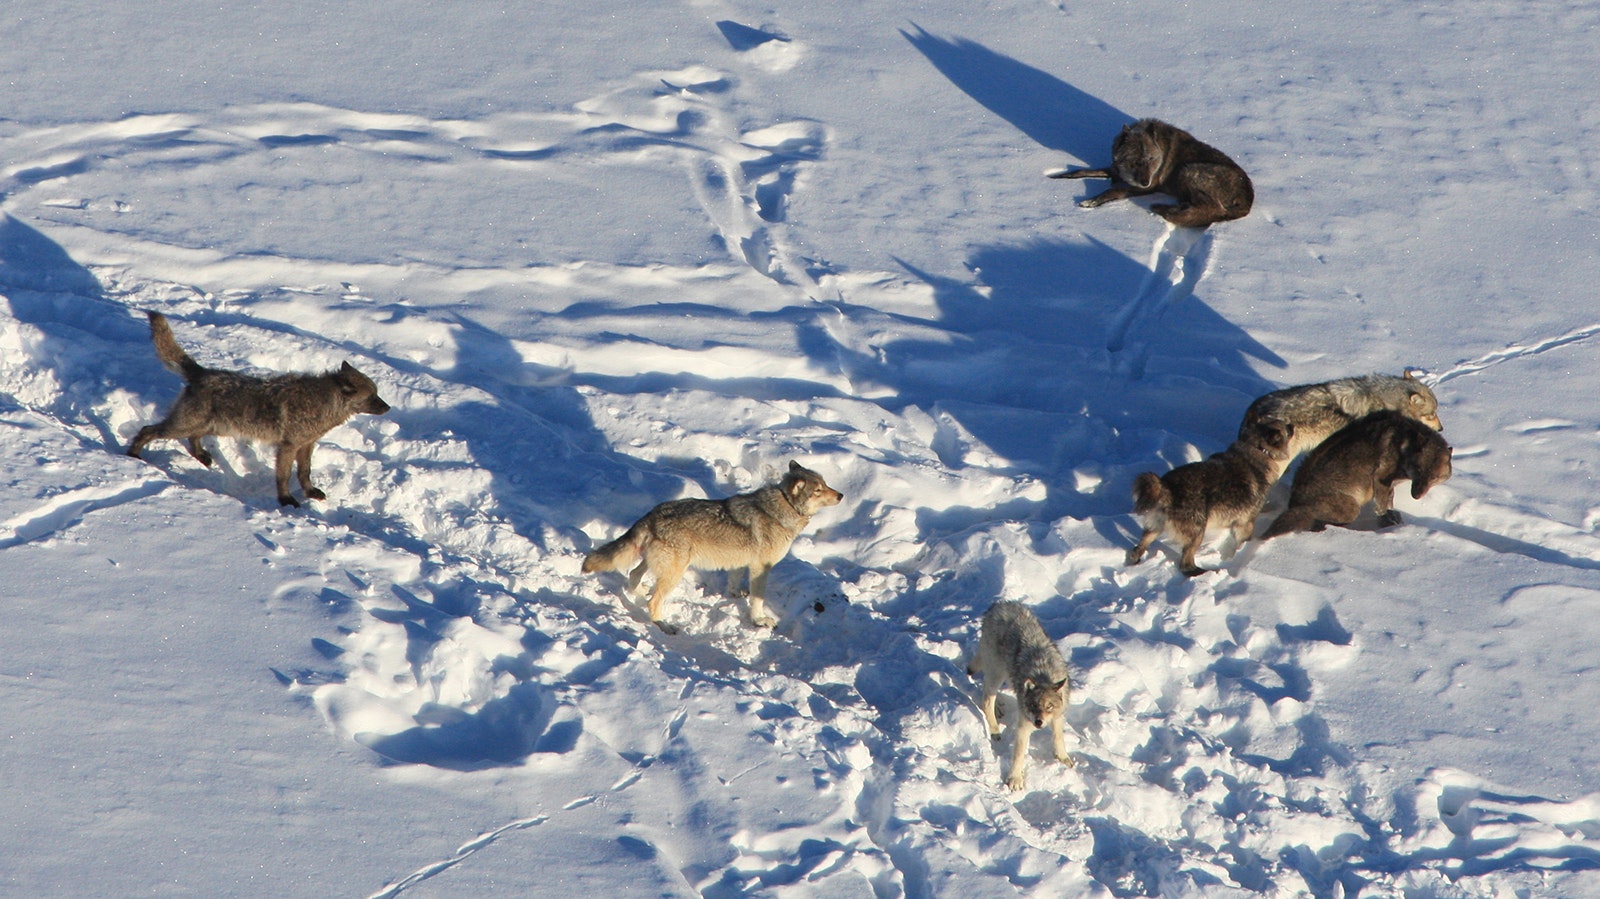 At age 11, Yellowstone’s Wolf 907F – the gray wolf in the center of this photo from 2020 – has lived more than double the typical lifespan of wolves in the wild.